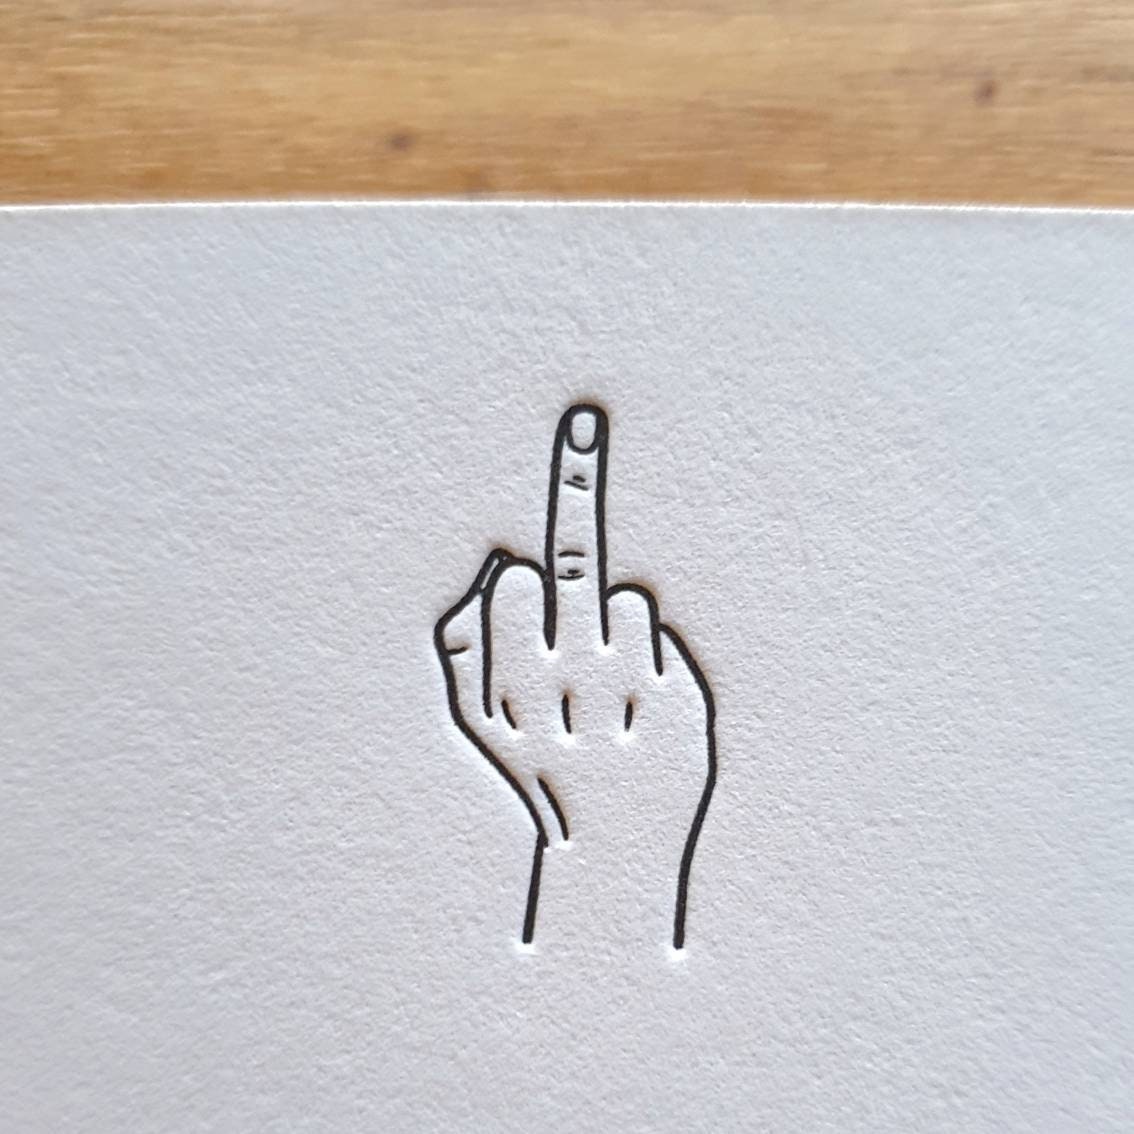 Flip The Bird At Your Haters With These NSFW Tattoos  Tattoodo